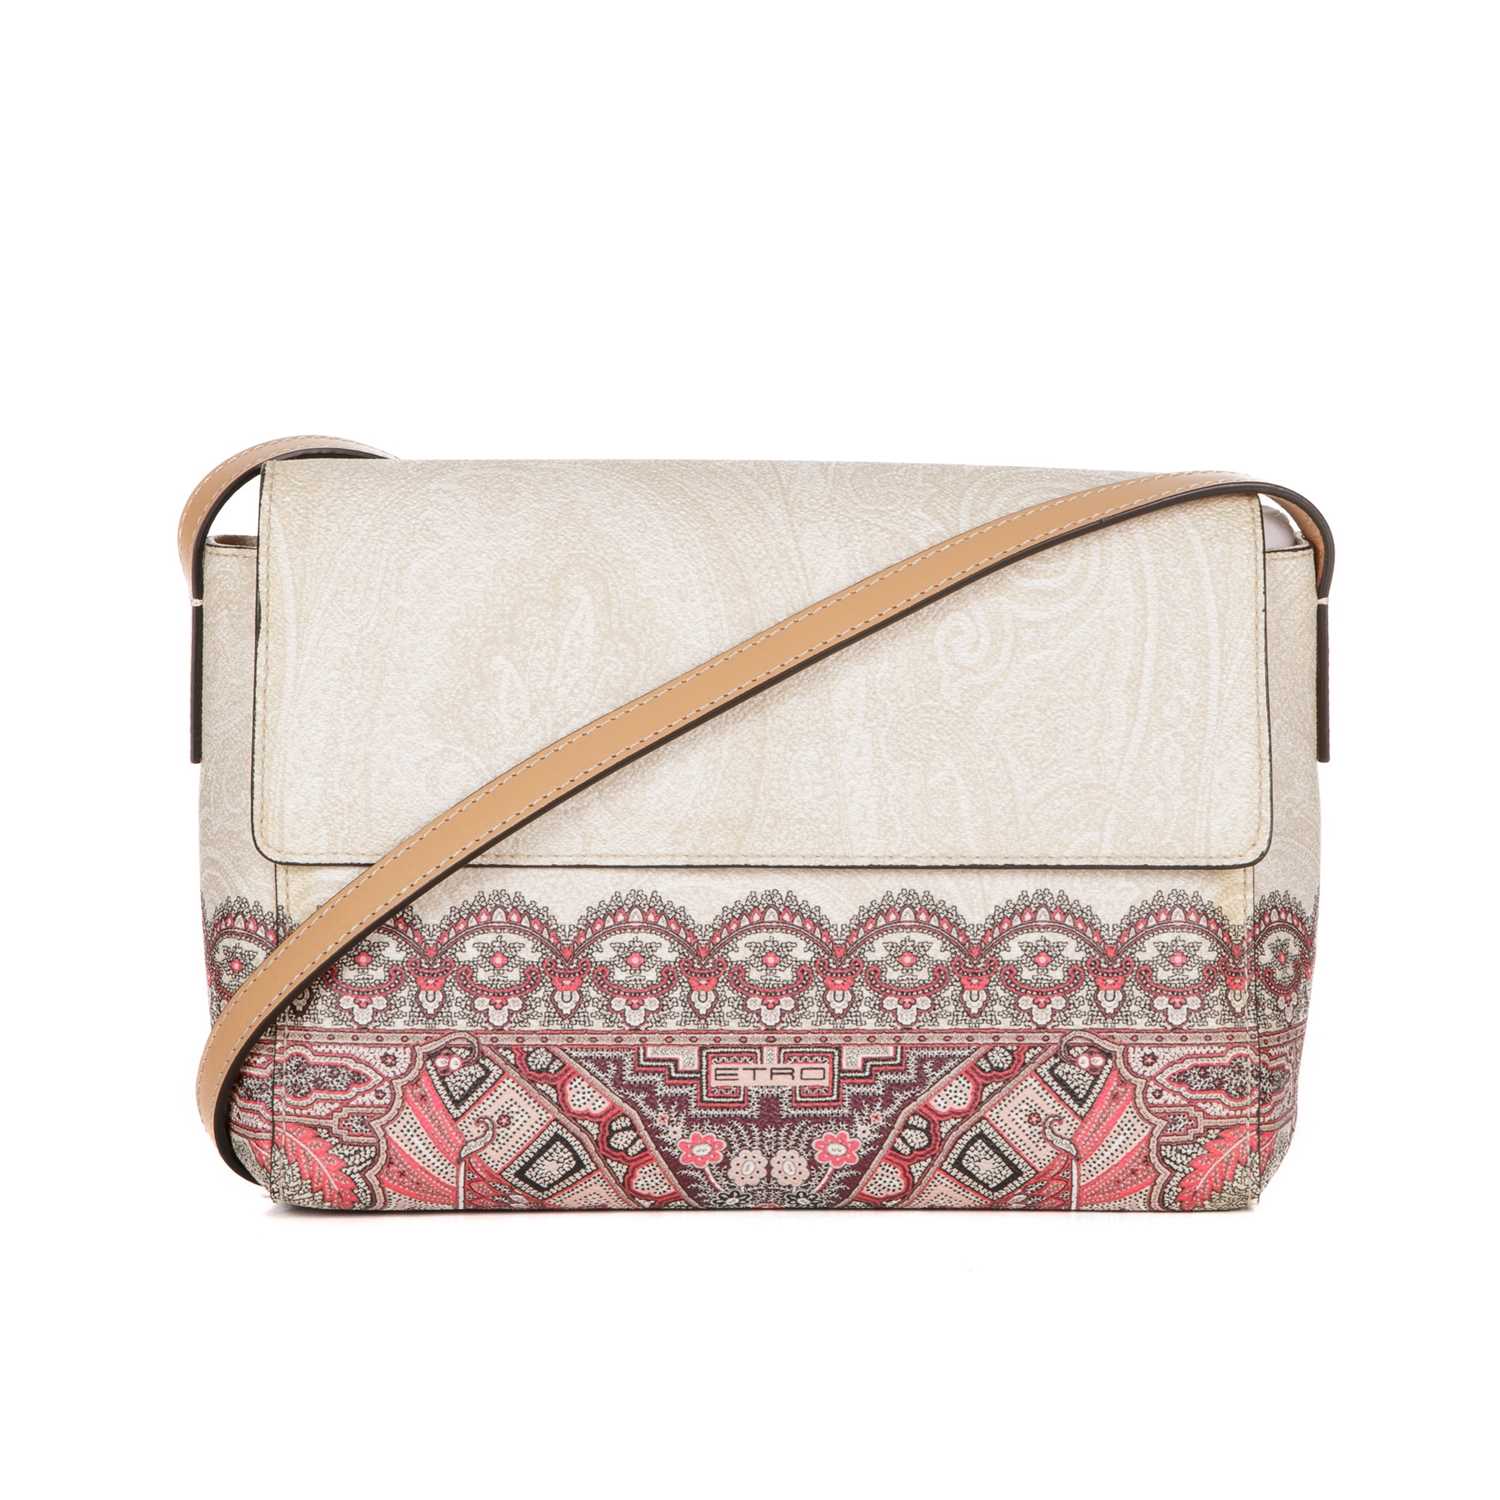 Etro, a coated canvas crossbody handbag, featuring a subtle paisley pattern to the cream exterior